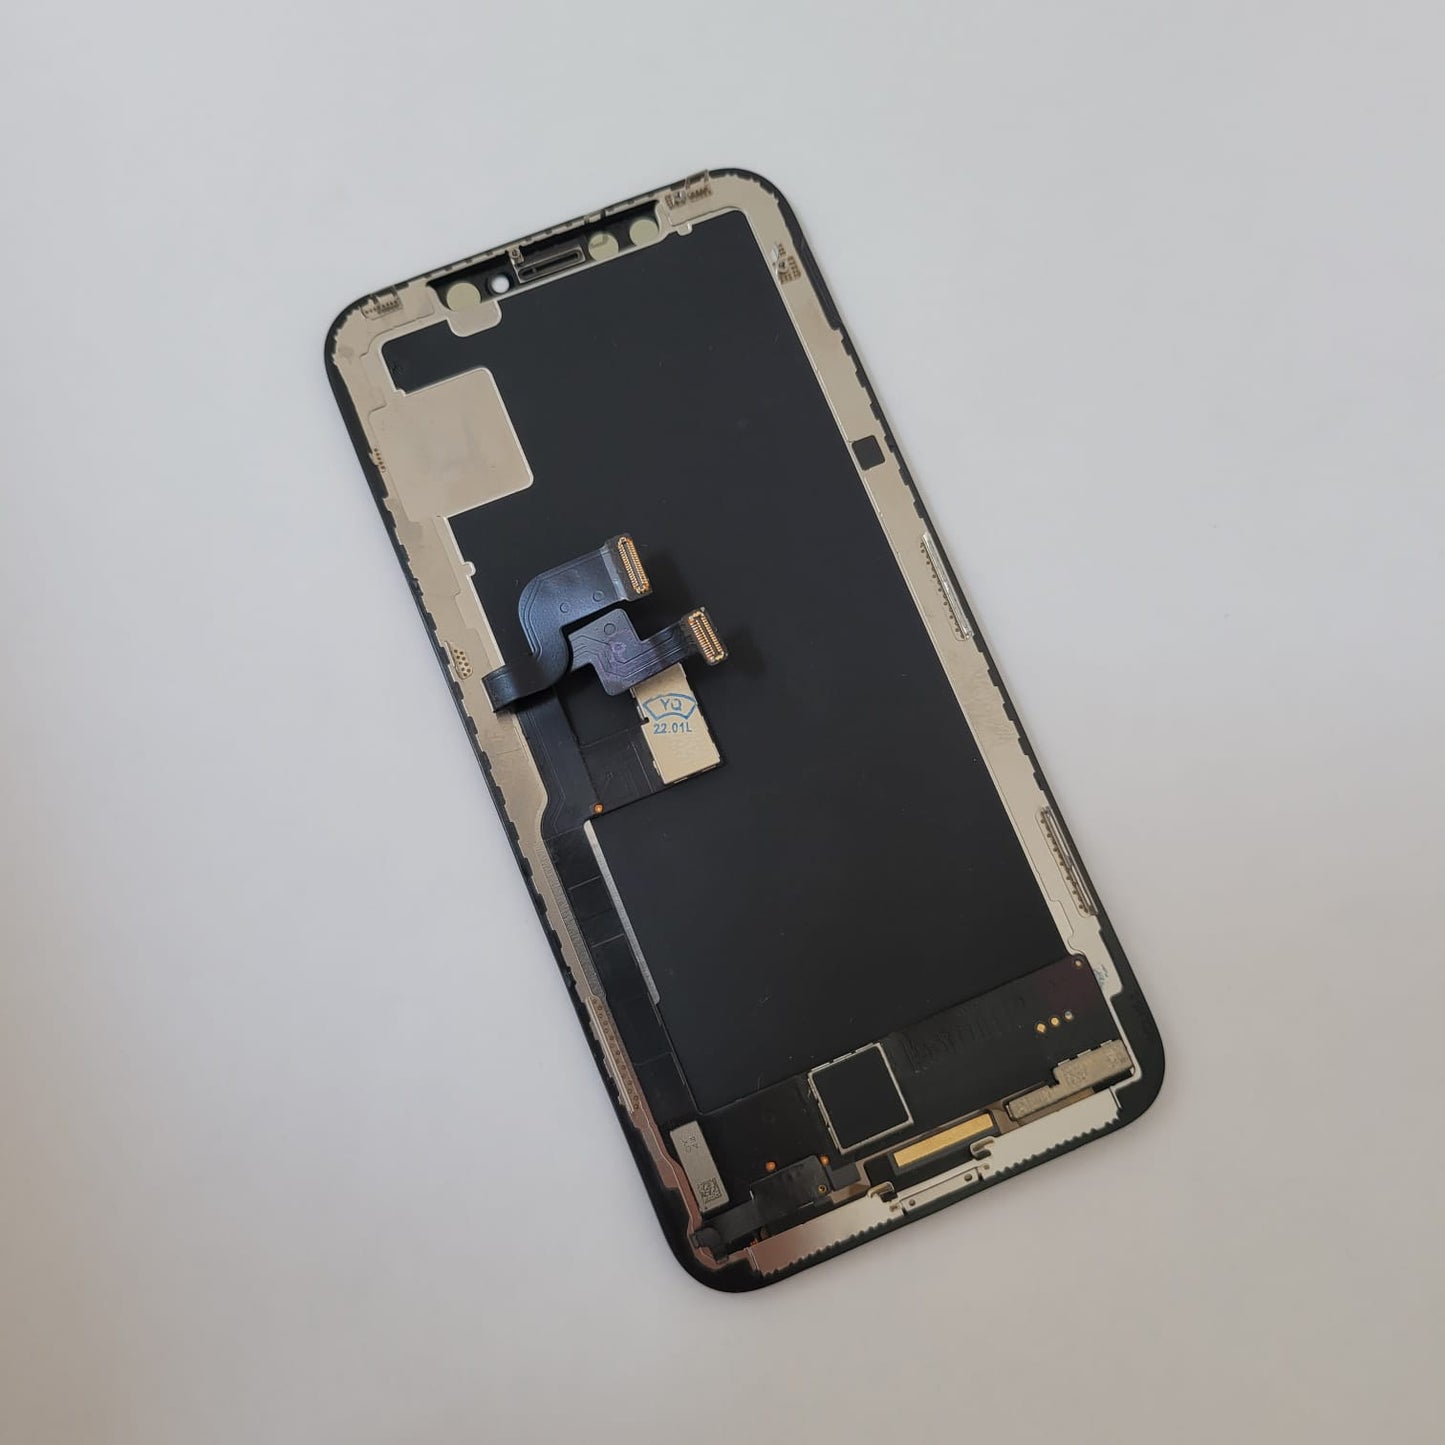 Display iPhone X INCELL